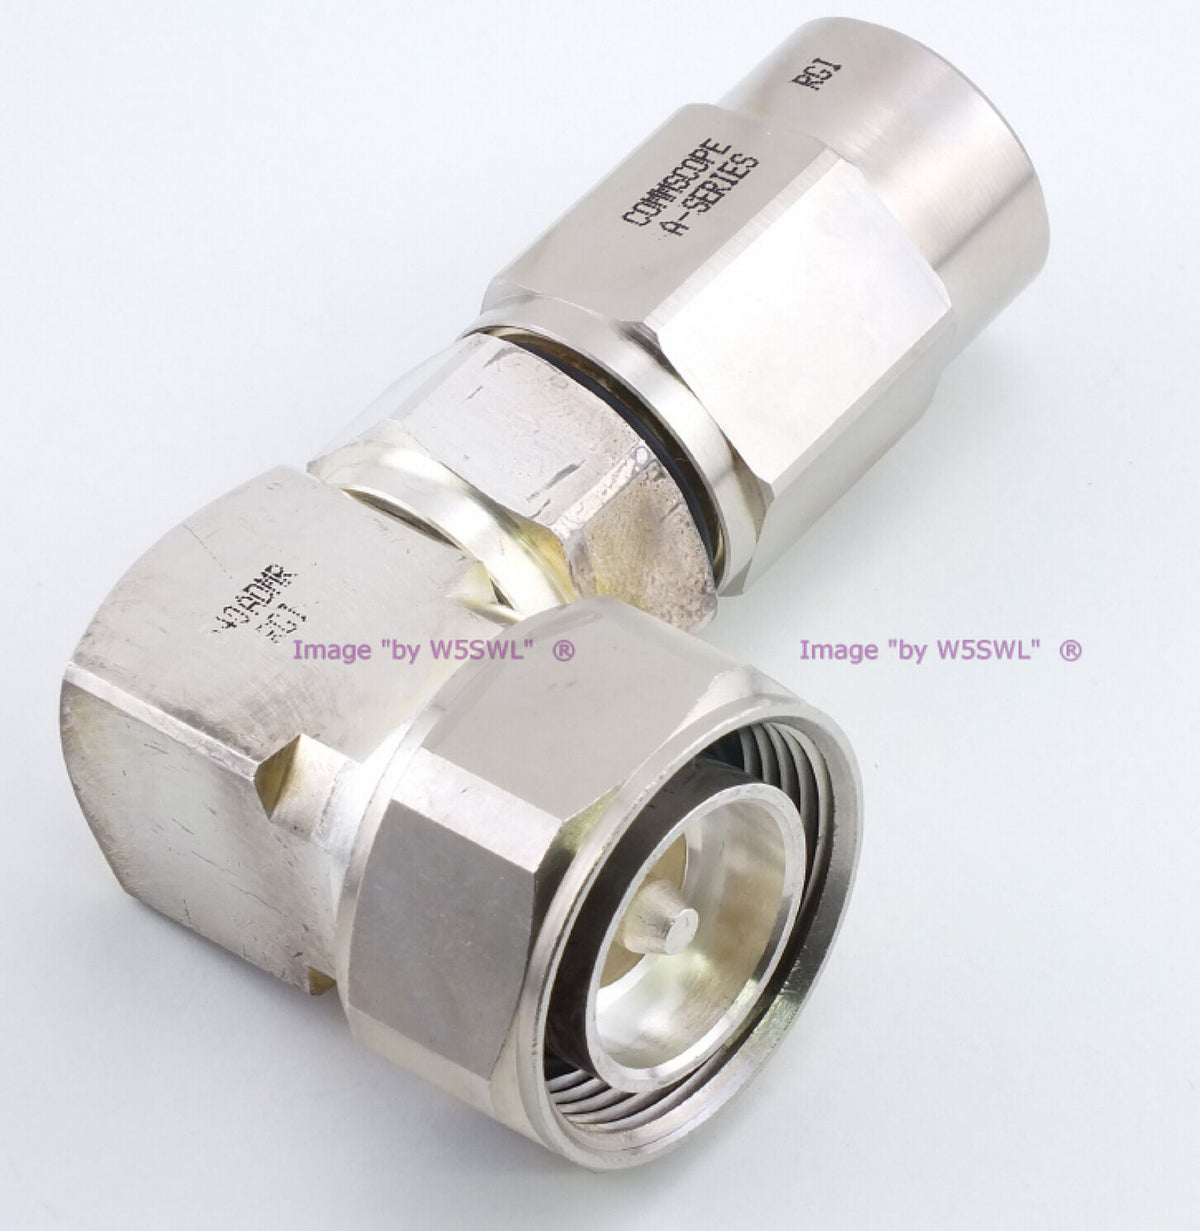 7/16 Din Male Connector Right Angle 540 ADMR A-Series Commscope - Dave's Hobby Shop by W5SWL